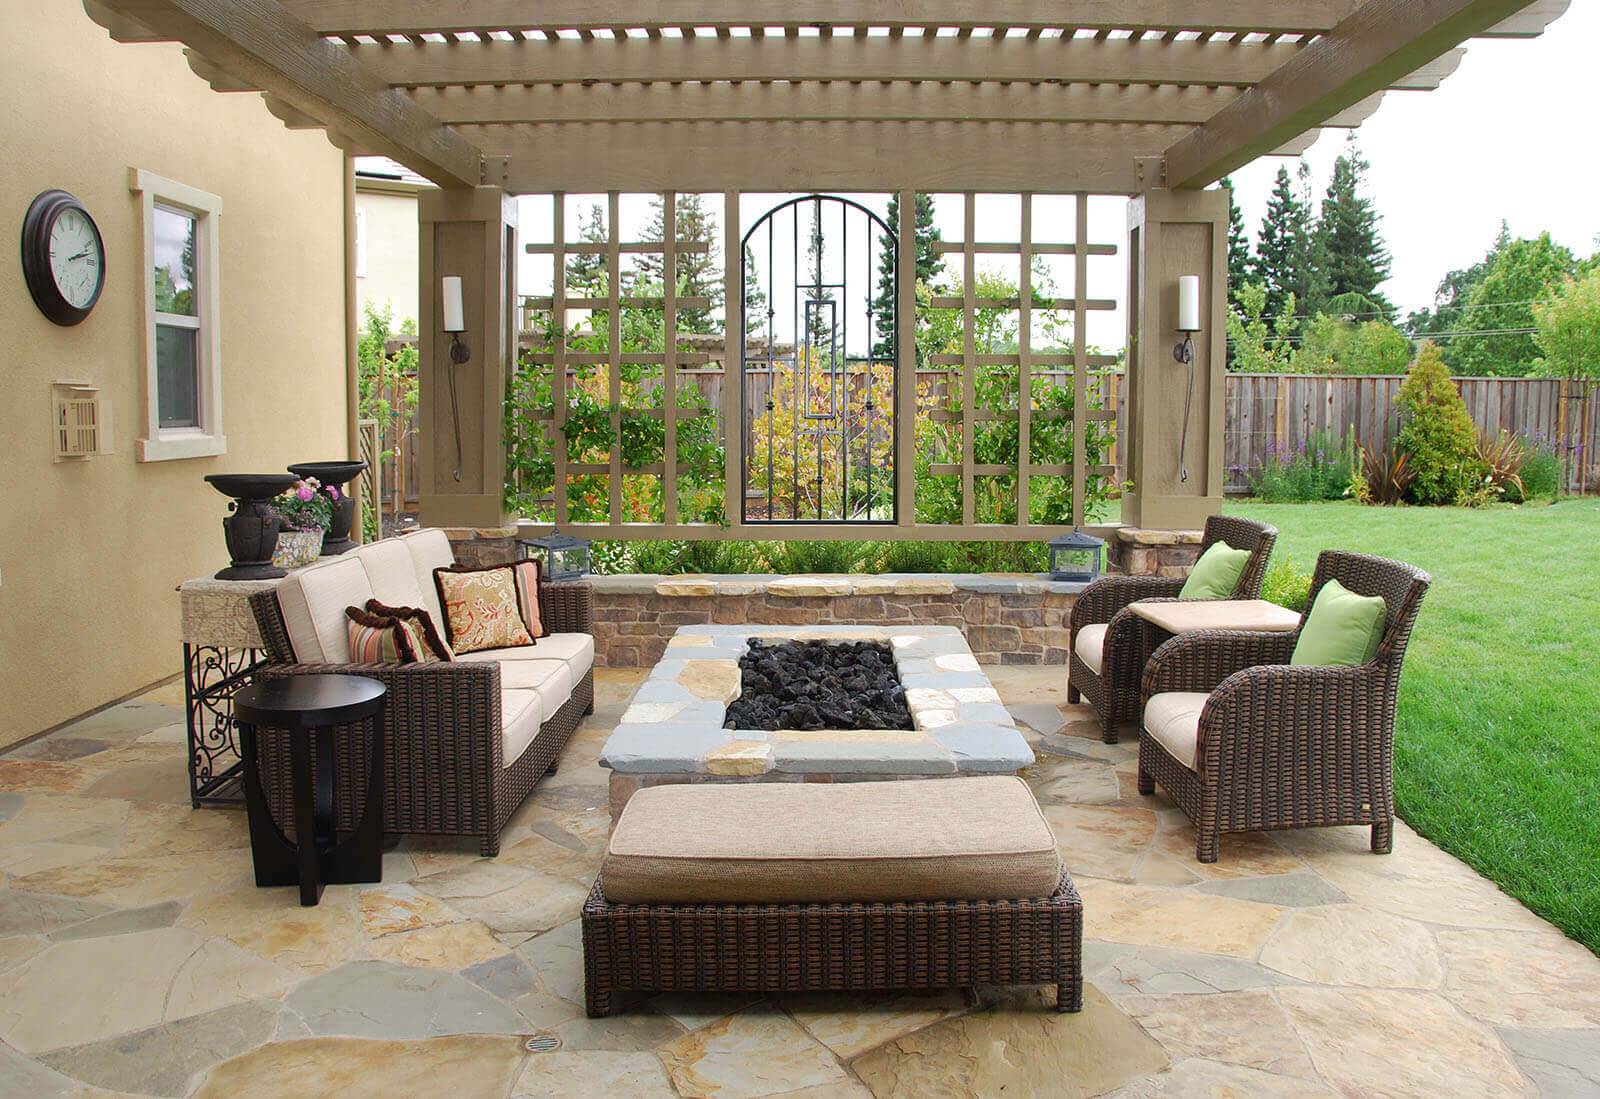 Wood slat-roofed pergola with trellised vines, custom wrought iron panel, and sconce lighting shelters a low stone firepit and lounge seating on a flagstone patio